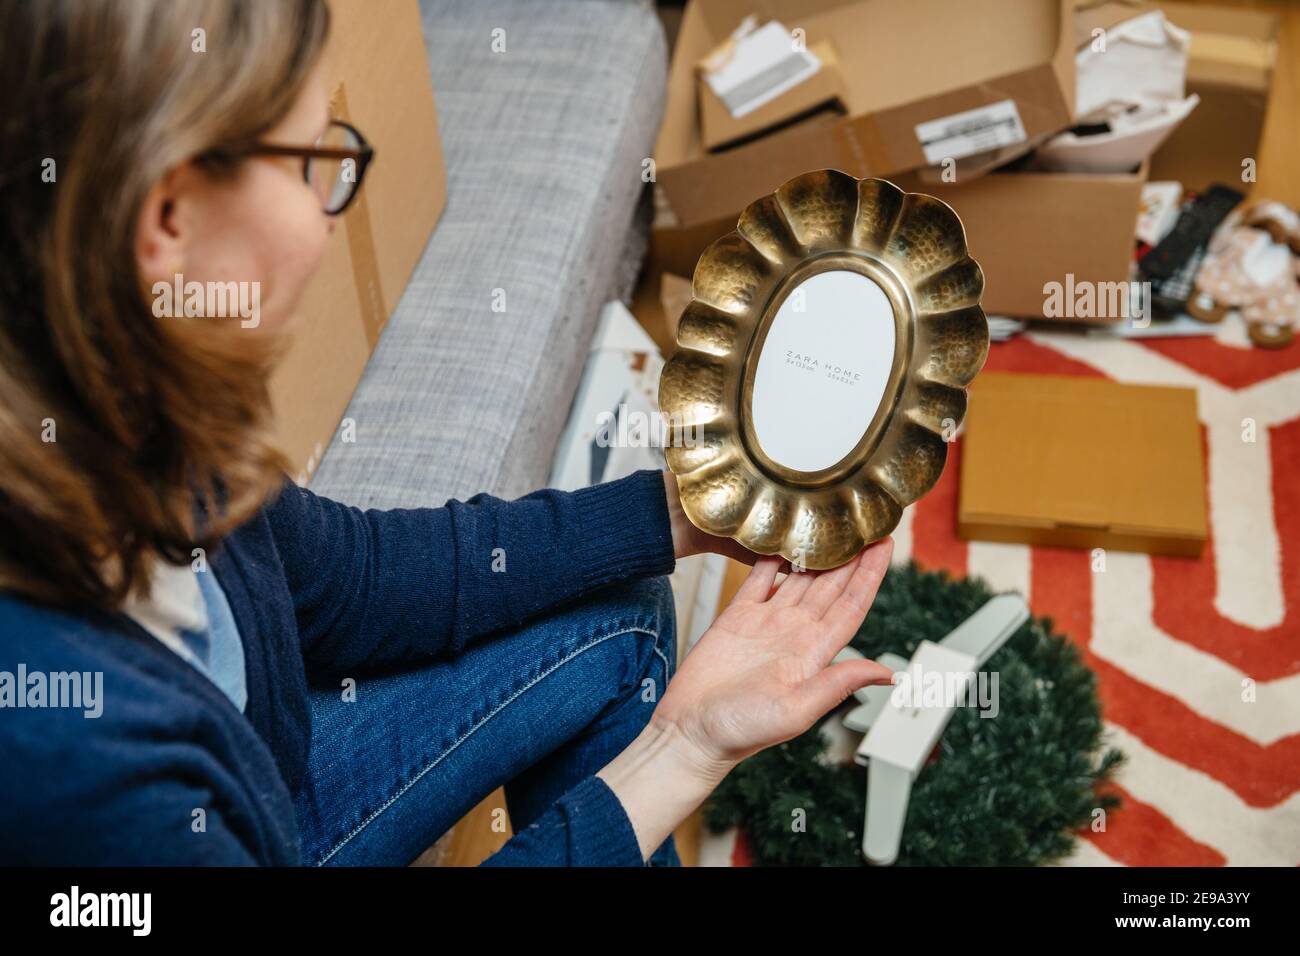 Paris, France - Jan 22, 2021: POV woman unboxing new Zara Home product -  beautiful vintage forged steel photo frame Stock Photo - Alamy